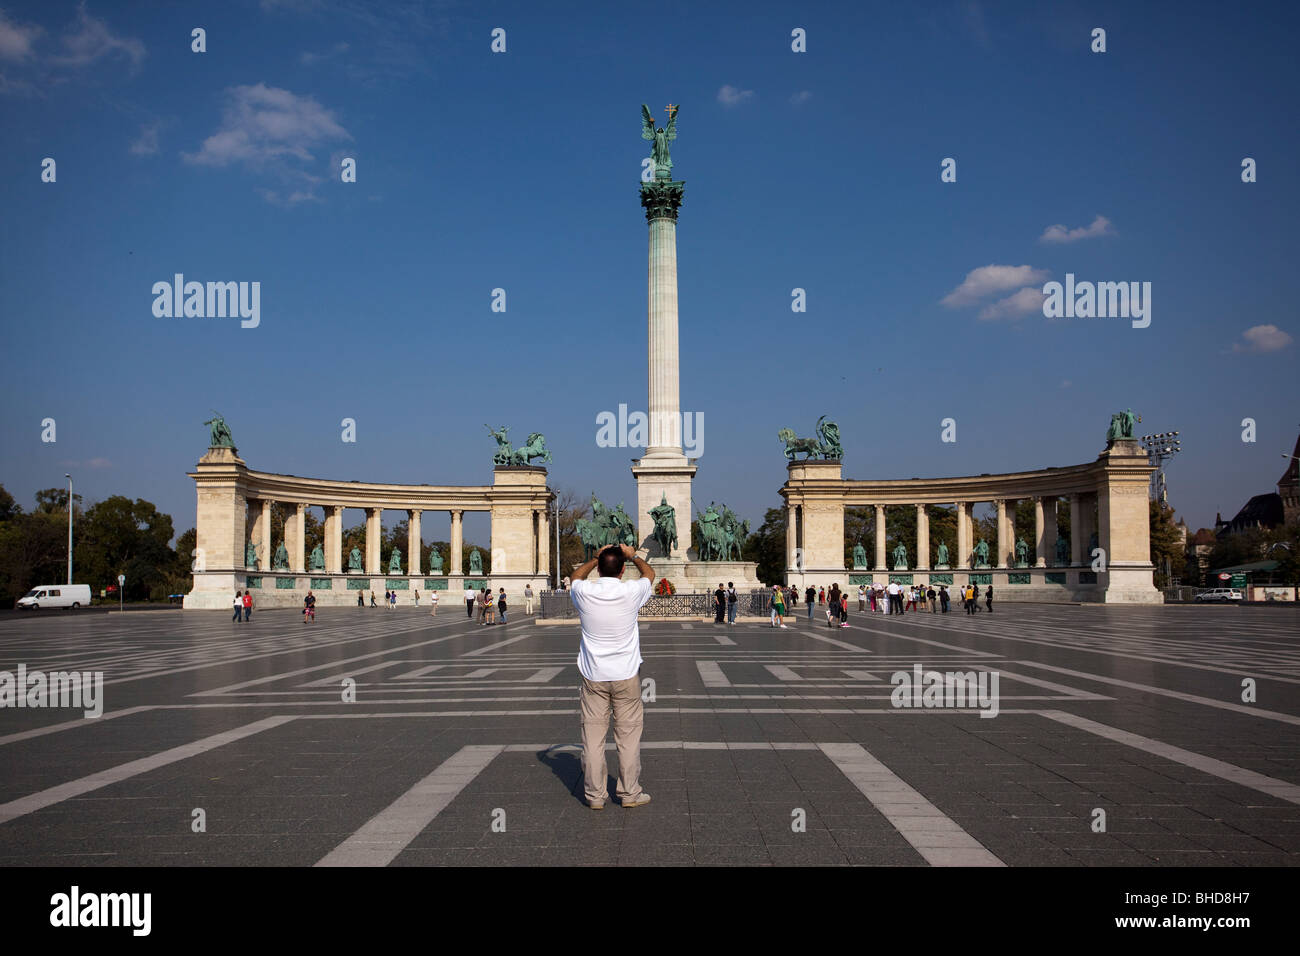 A man taking a photo in Hősök tere Heroe's square Stock Photo